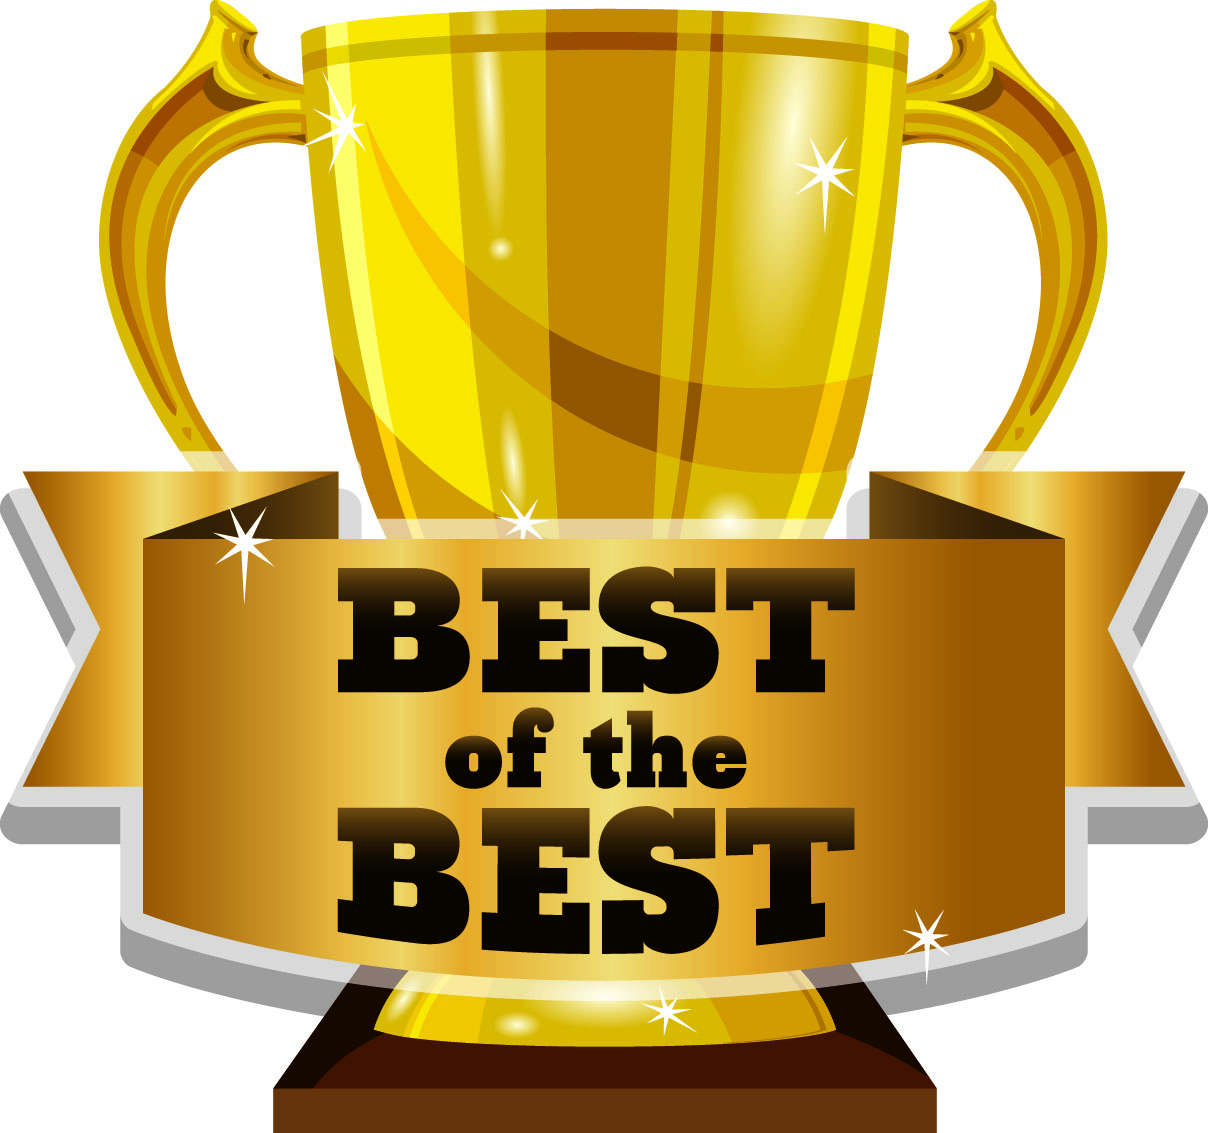 Have you voted yet in The Dillon Herald’s "Best of the Best" cont...